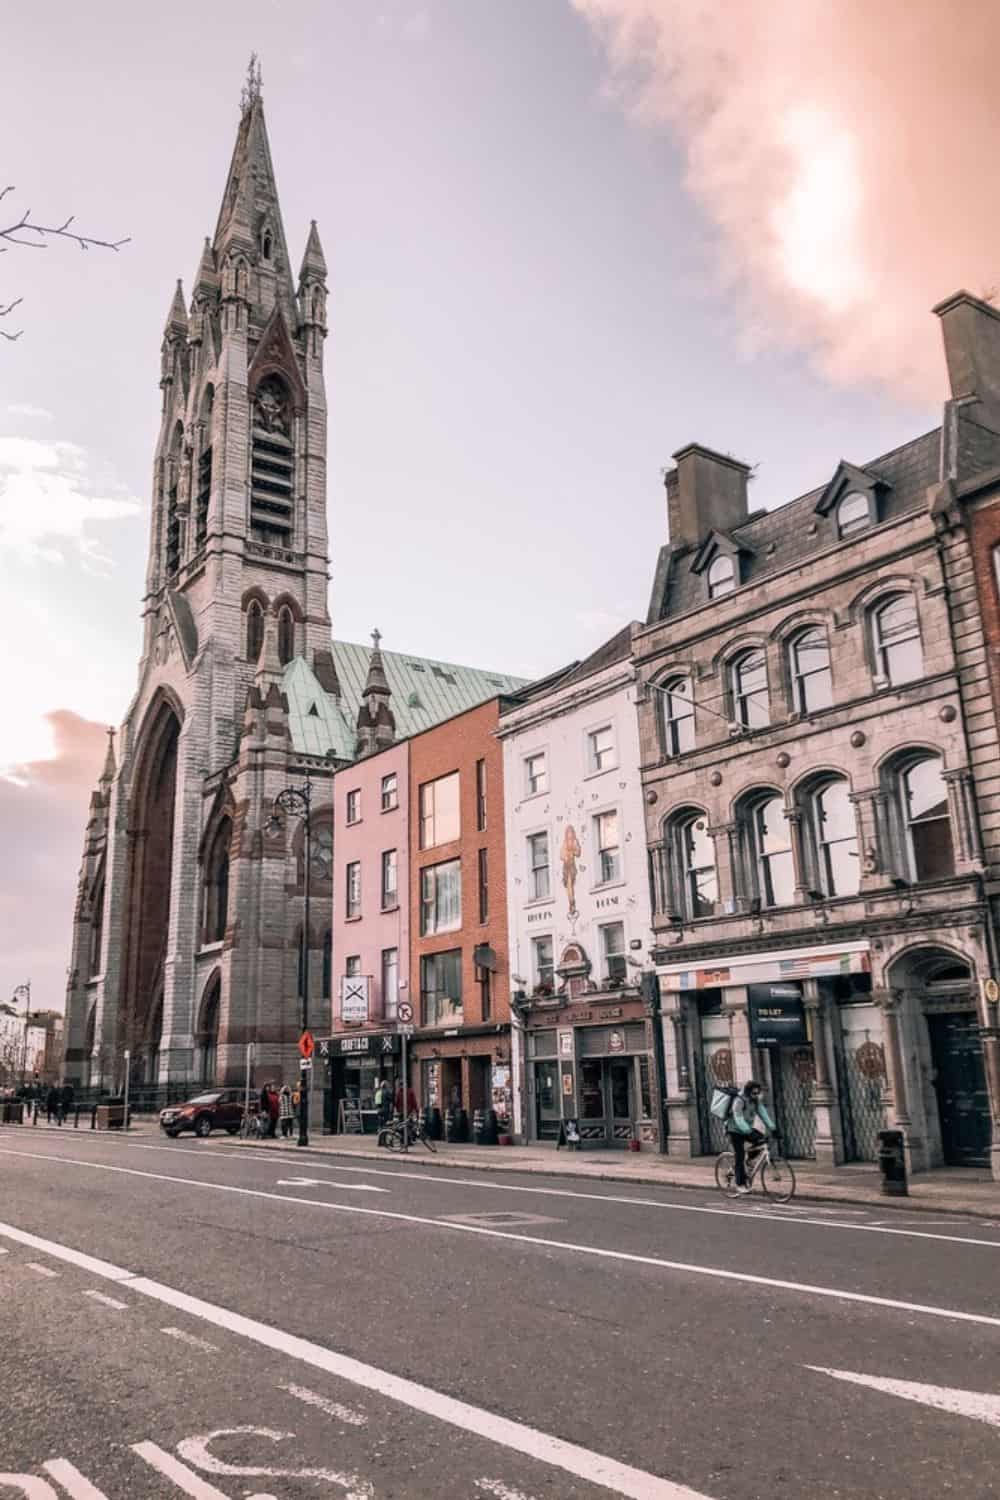 An old cathedral in Dublin, showcasing the historical architecture visited by solo travelers